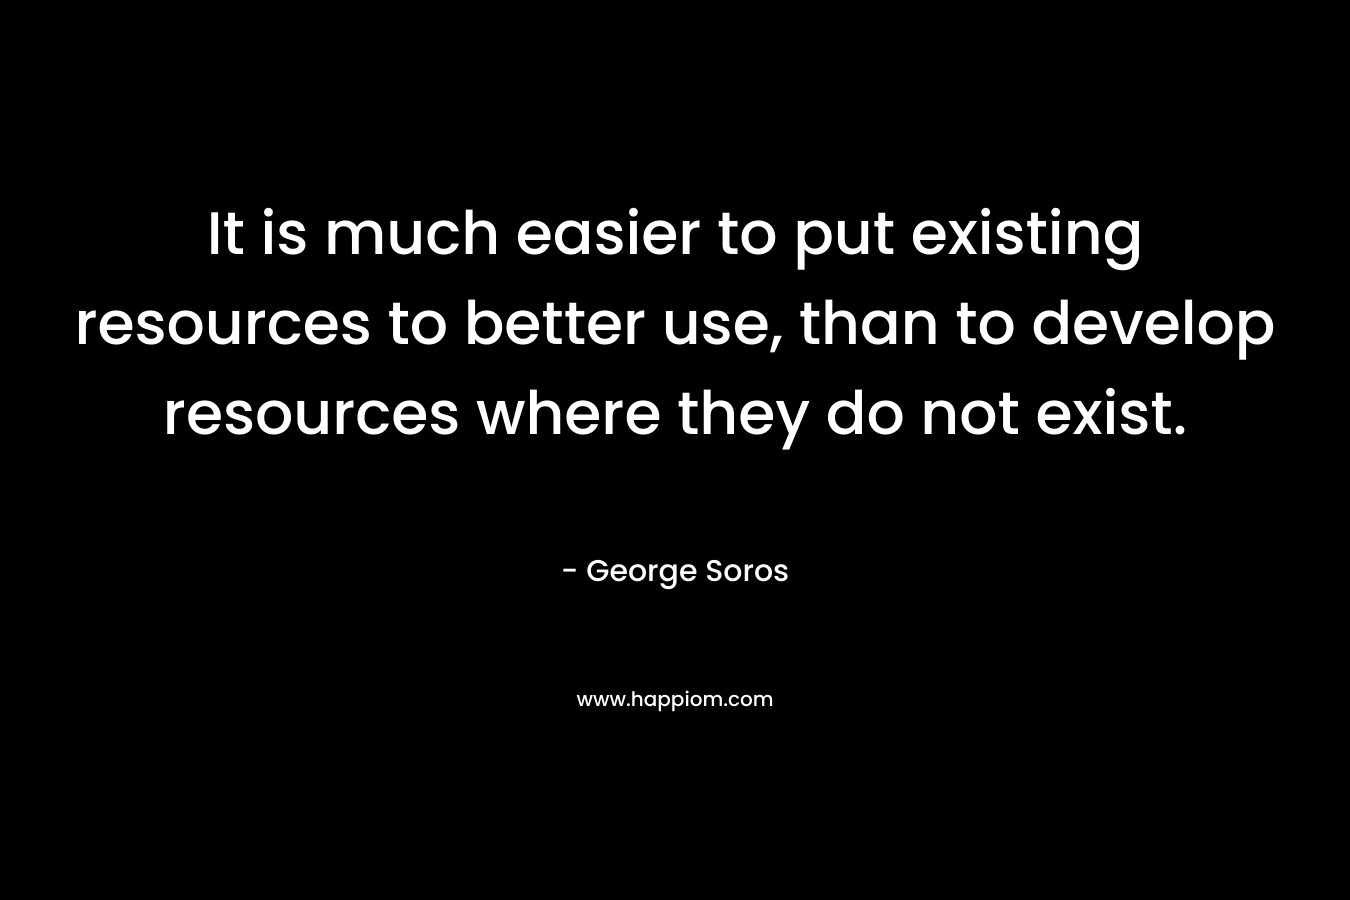 It is much easier to put existing resources to better use, than to develop resources where they do not exist.